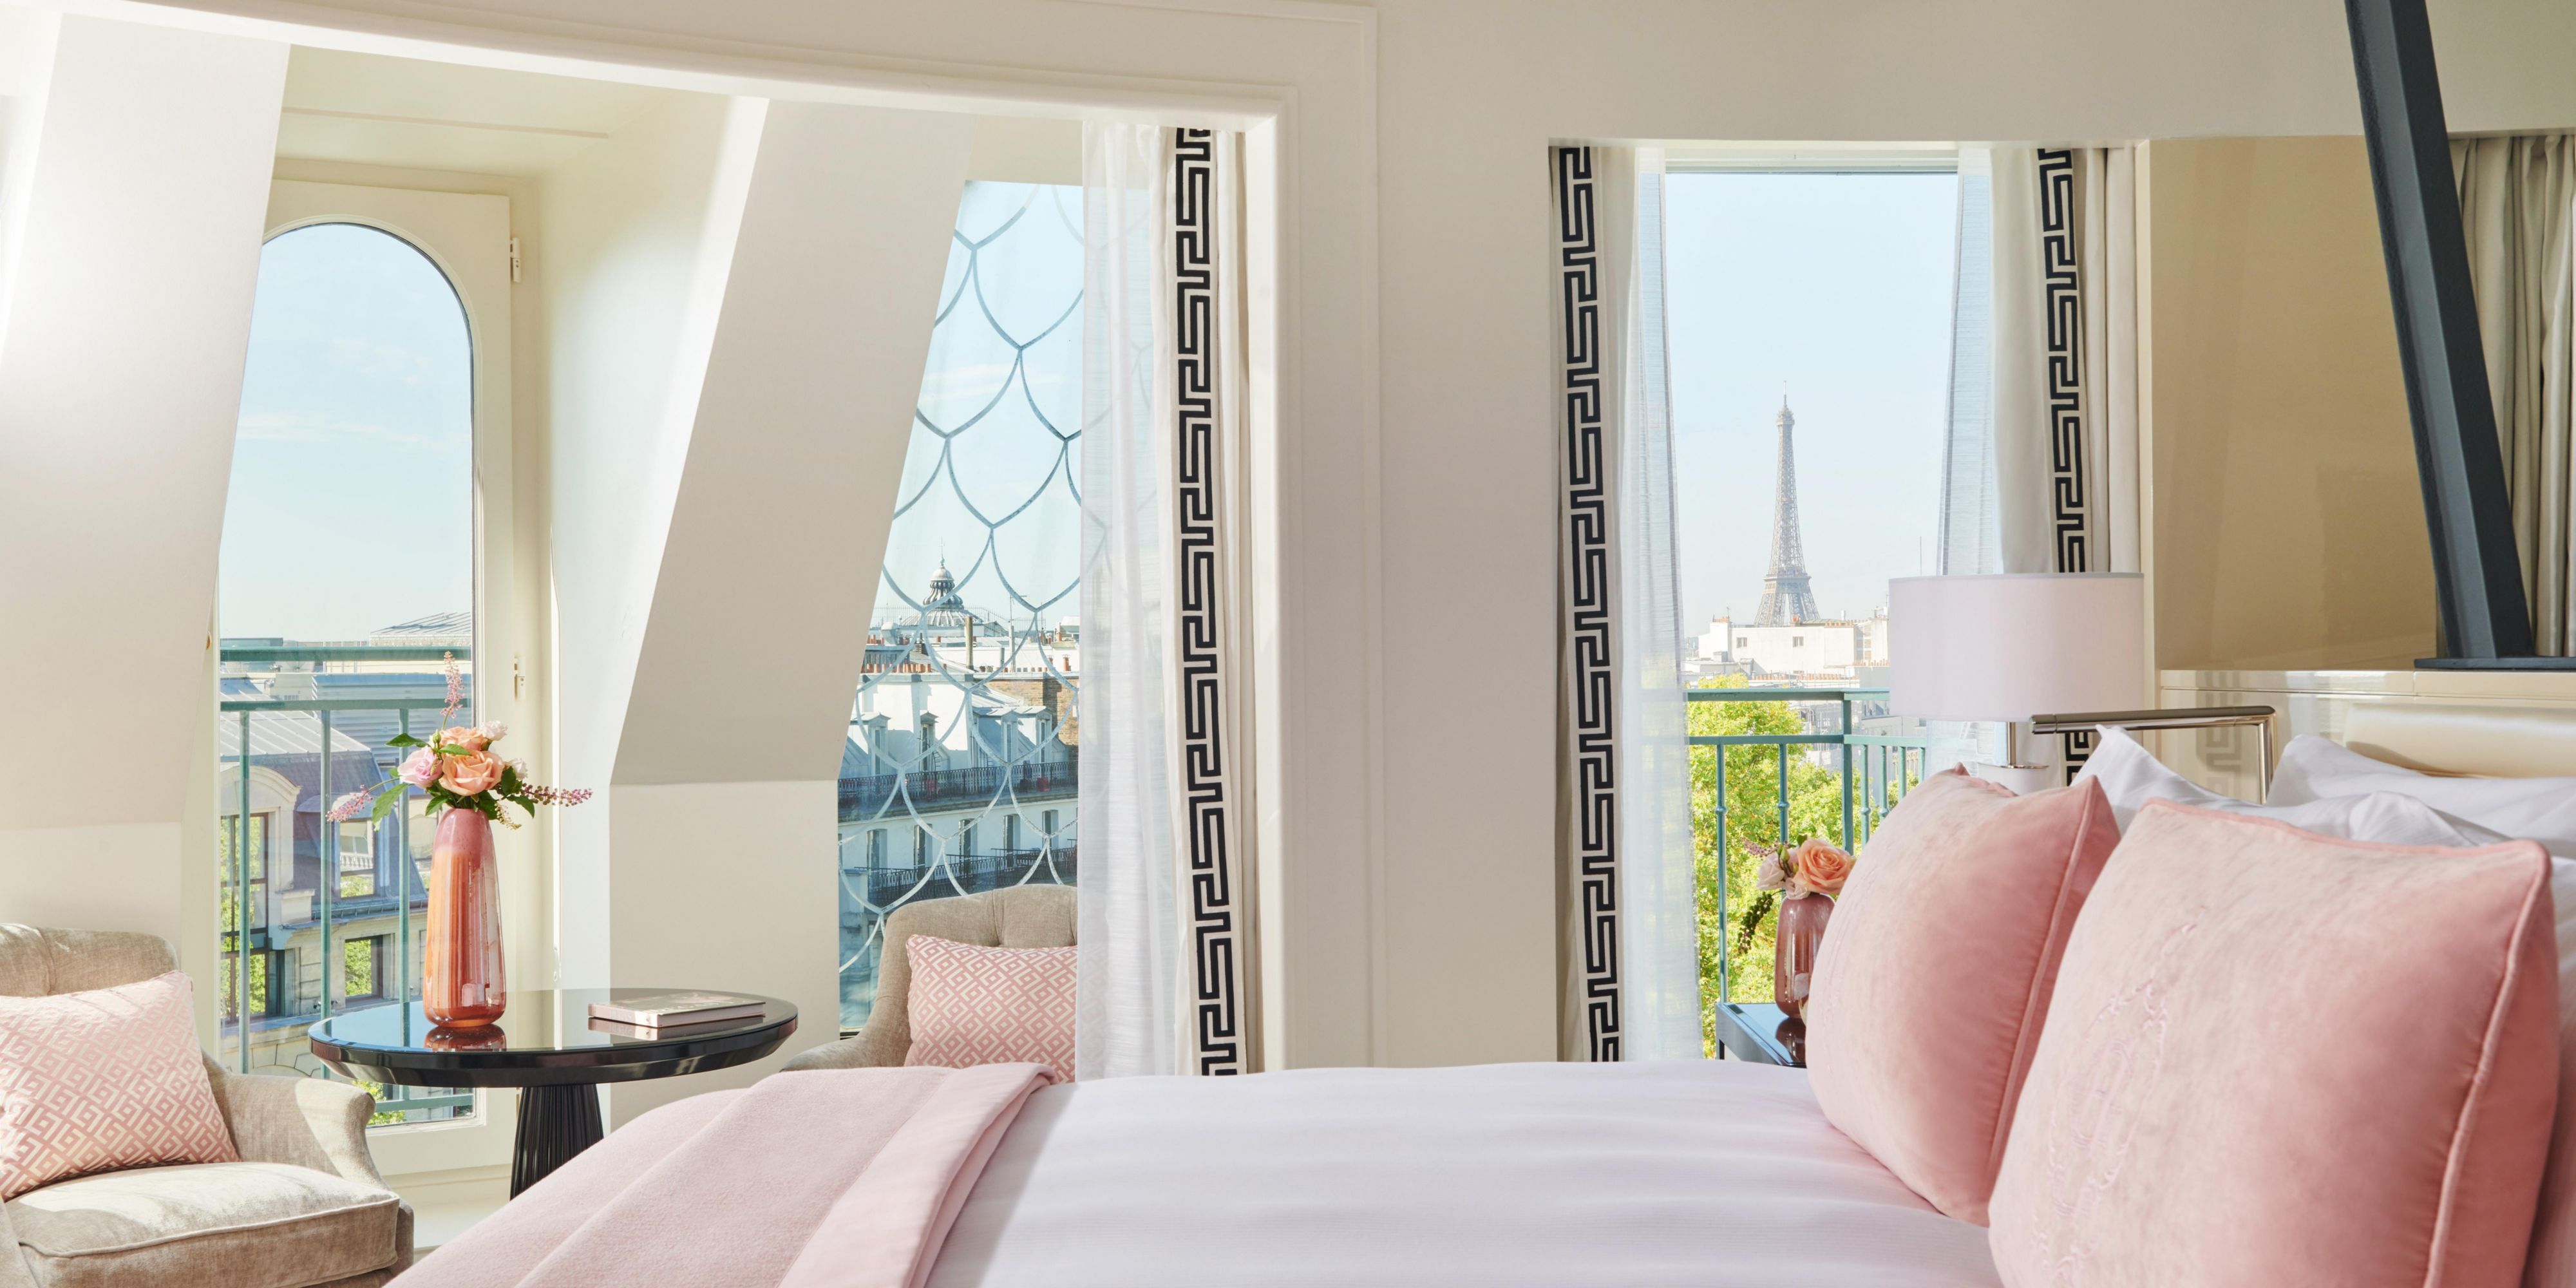 Our five signature suites each offer their own version of luxury, comfort, and Parisian living. With a breathtaking panoramic views over the roof of the Opera Garnier or the Eiffel tower, they are a haven above the city with a chic, contemporary feel emulating the City of Lights below.